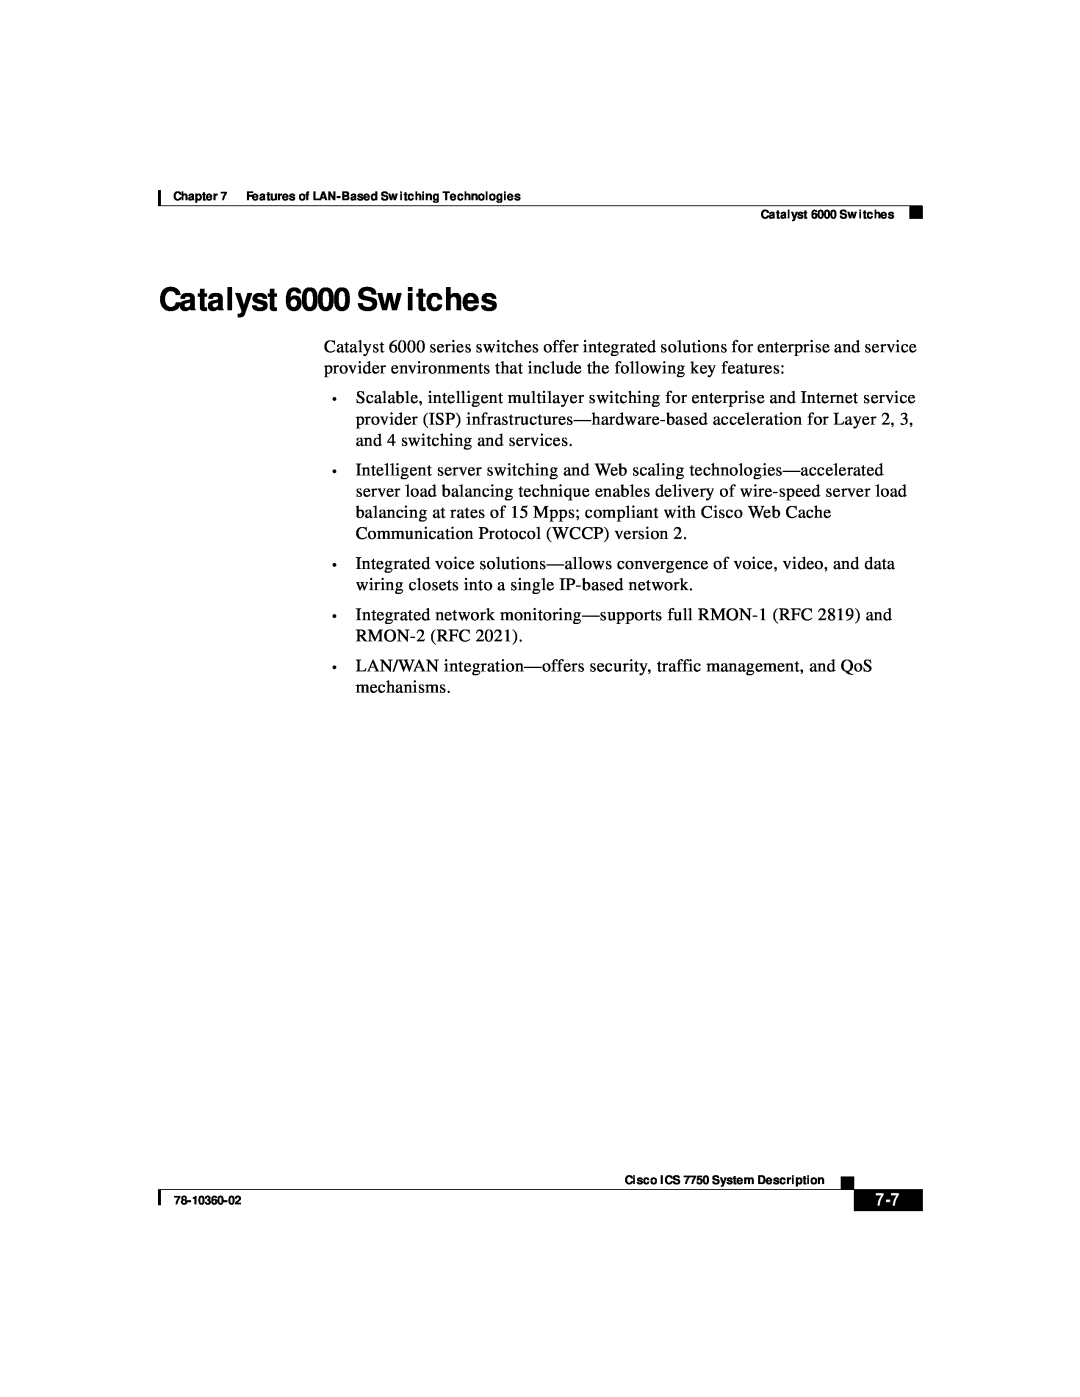 Cisco Systems ICS-7750 manual Catalyst 6000 Switches 